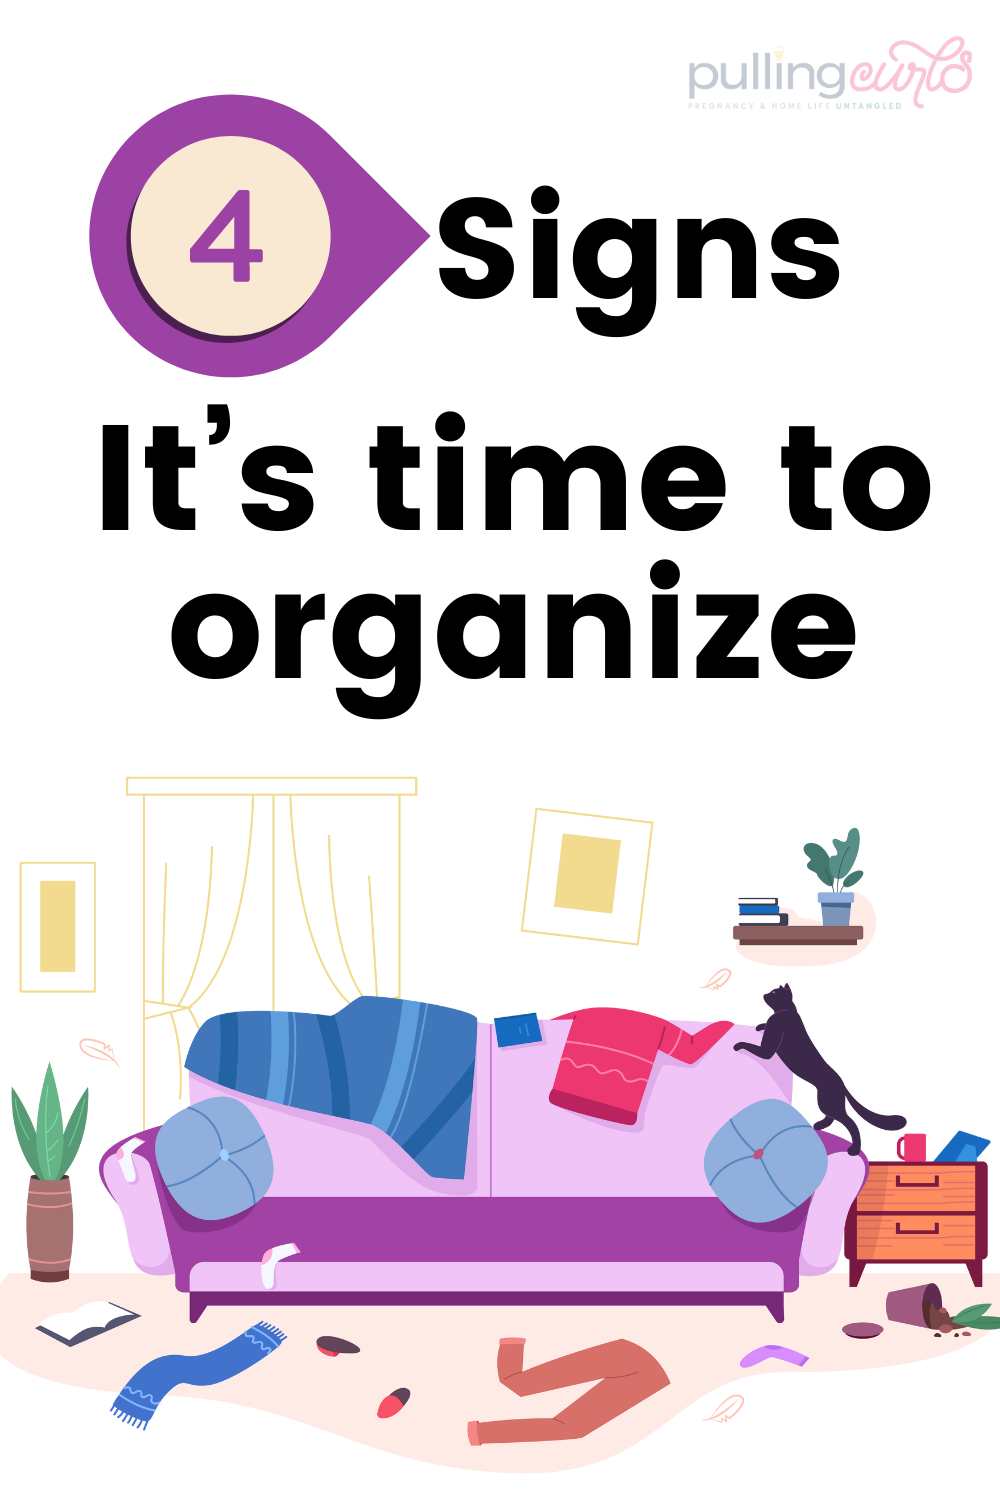 Discover the telltale signs it's time to get organized! From clutter chaos to productivity pitfalls, learn when to declutter and streamline your life. Get inspired with organization tips, declutter hacks, and efficient solutions. Say goodbye to mess and hello to harmony! 🗂️✨ #OrganizationGoals #DeclutterTips #HomeOrganization #ProductivityHacks #StreamlineYourLife #EfficiencyBoost #GetOrganized via @pullingcurls